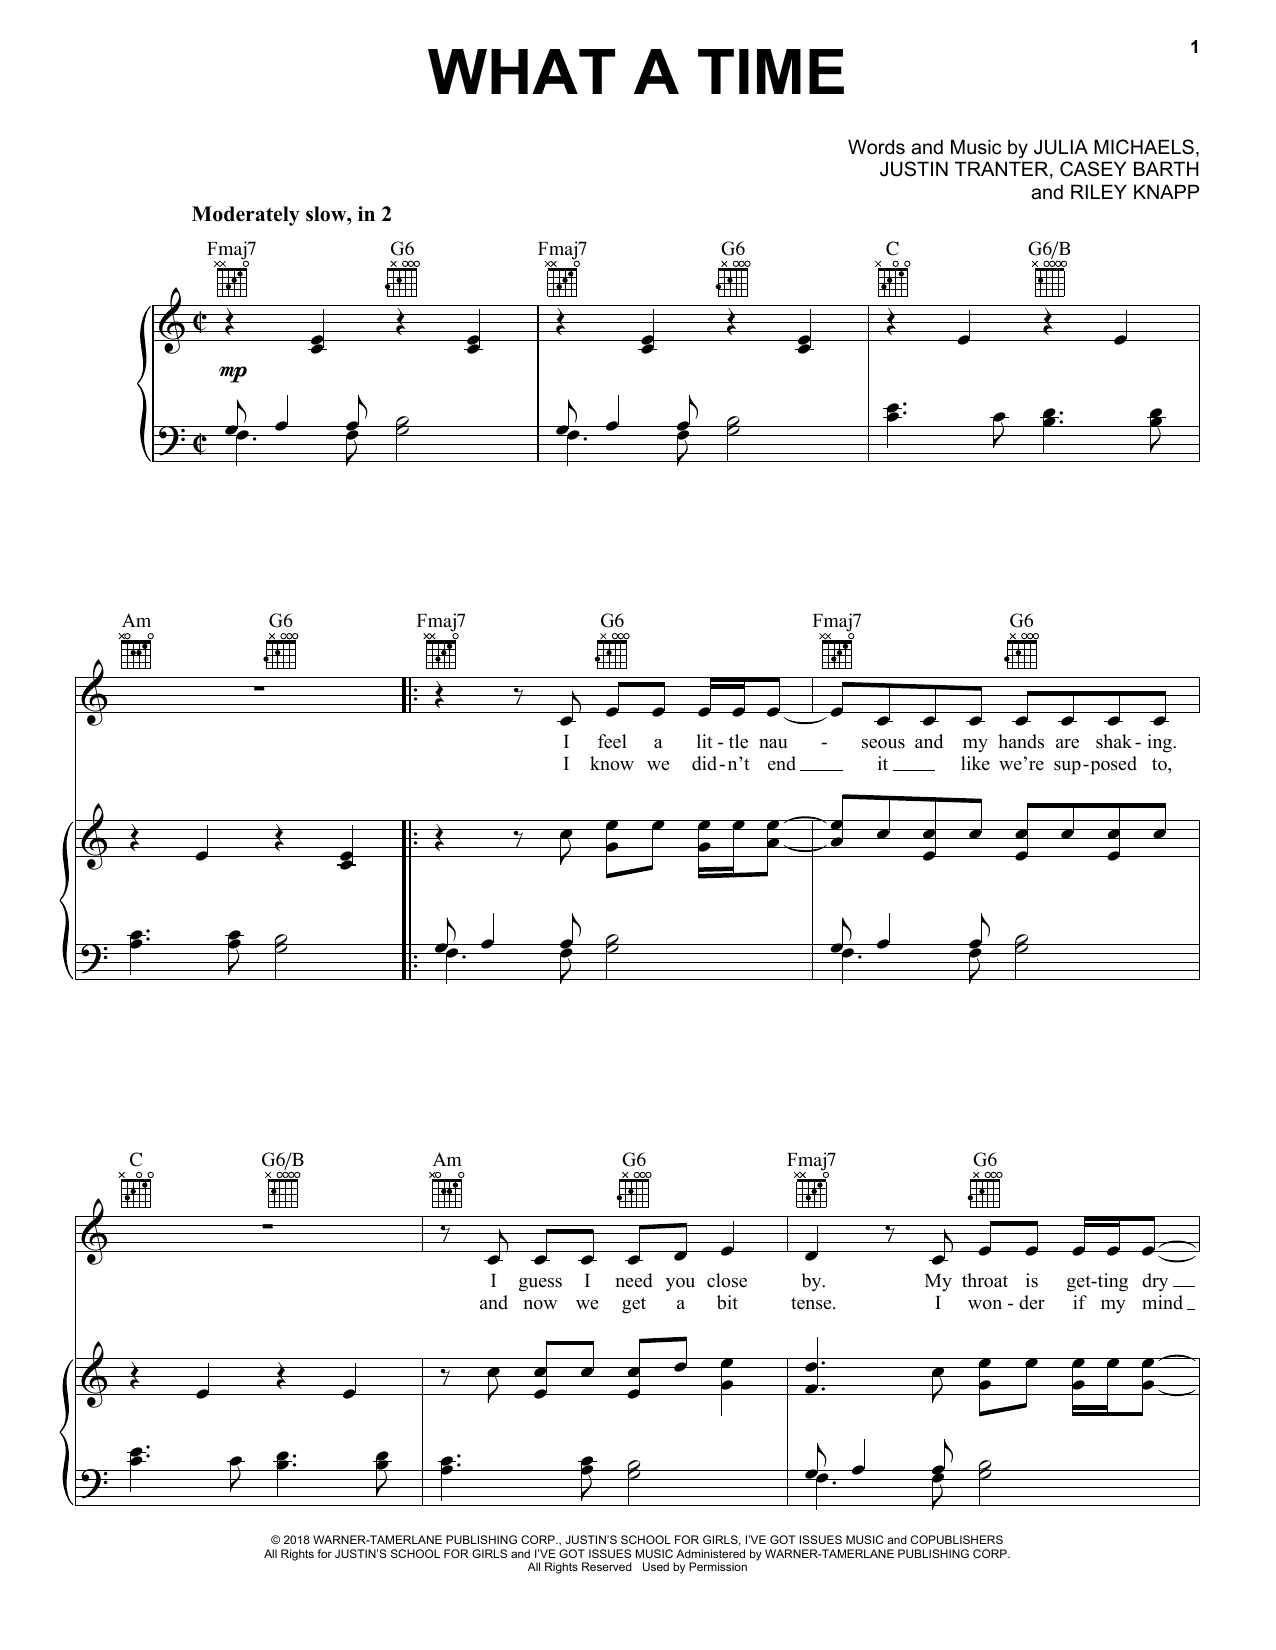 Download Julia Michaels What A Time (feat. Niall Horan) Sheet Music